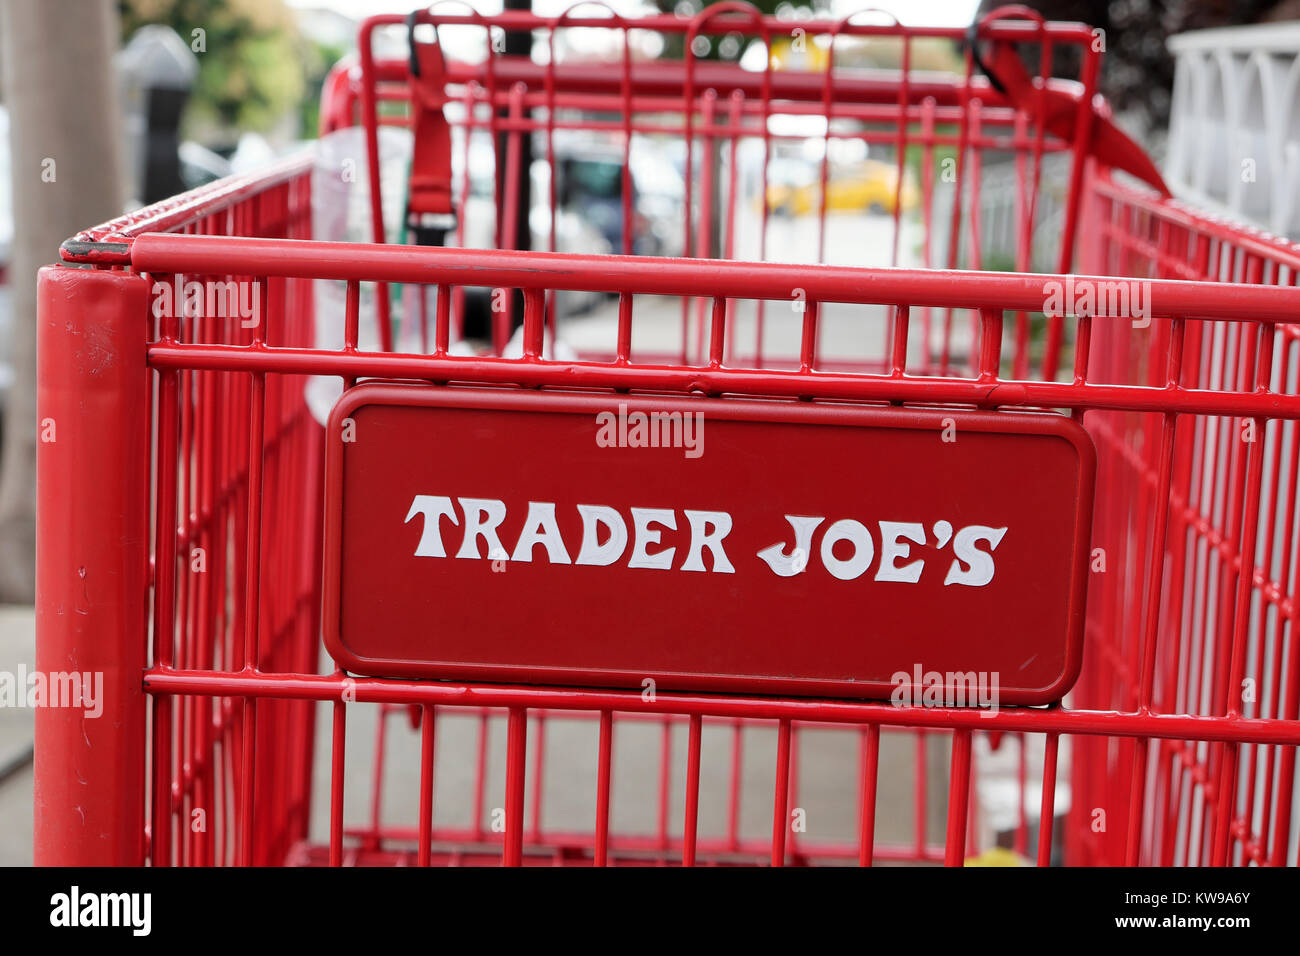 Trader Joe's grocery store shopping cart  on Hyperion Avenue in the Silver Lake neighbourhood of Los Angeles, California,   KATHY DEWITT Stock Photo